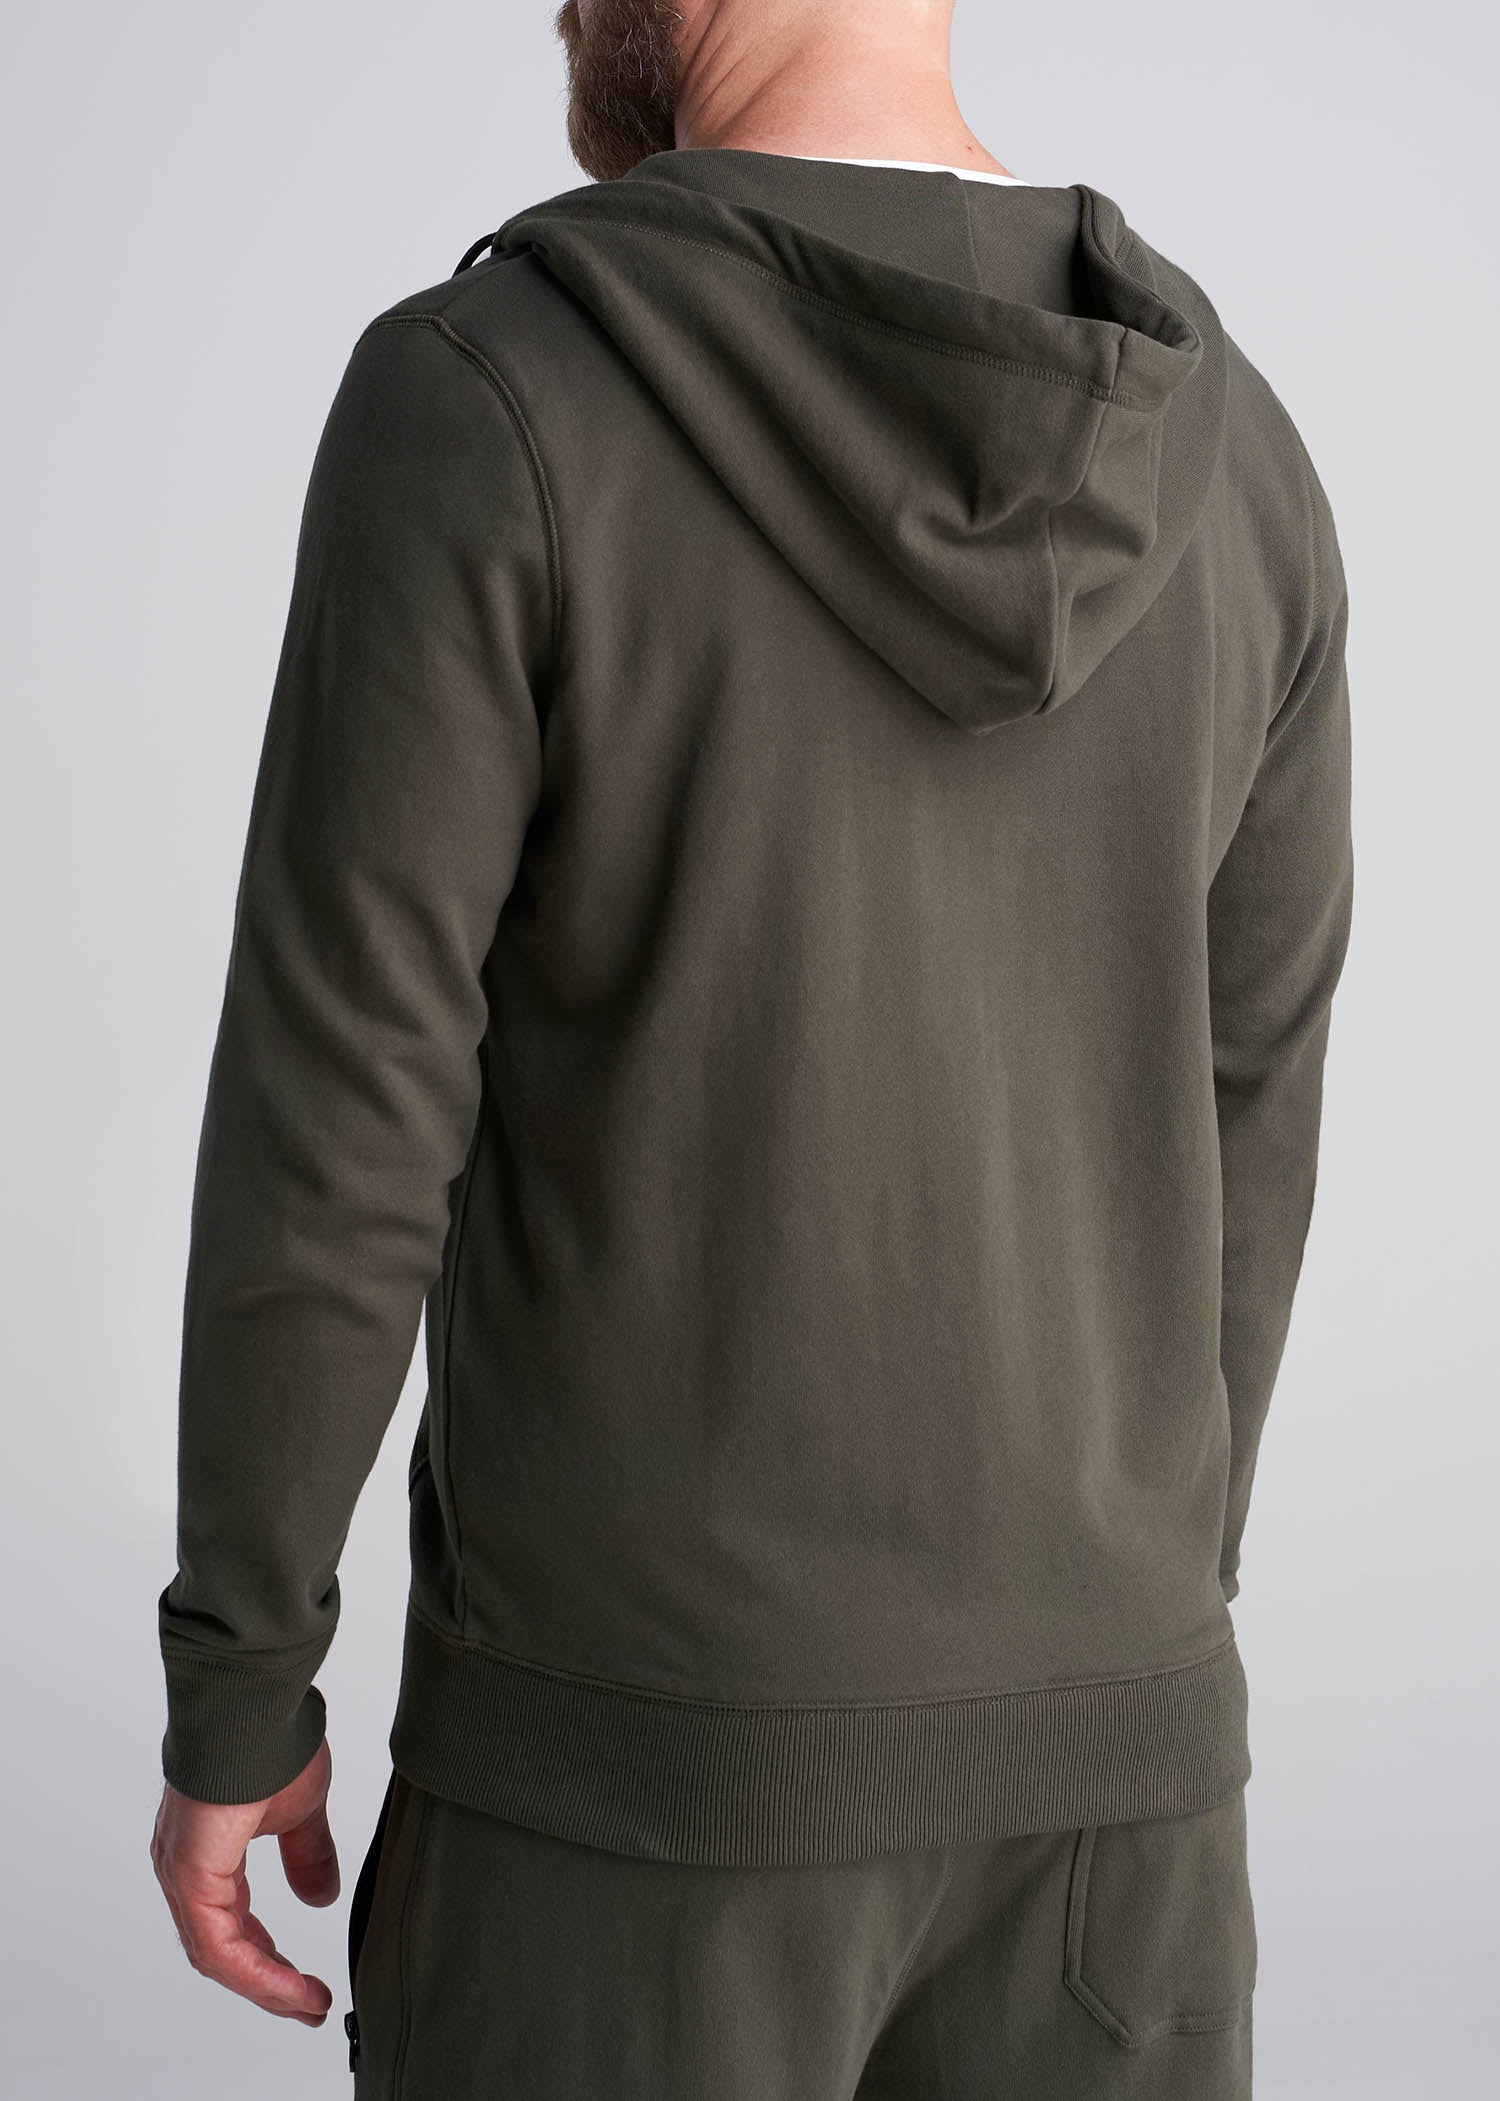 American_Tall_Men_Tall_French_Terry_Zip_Hoodie_CamoGreen-back